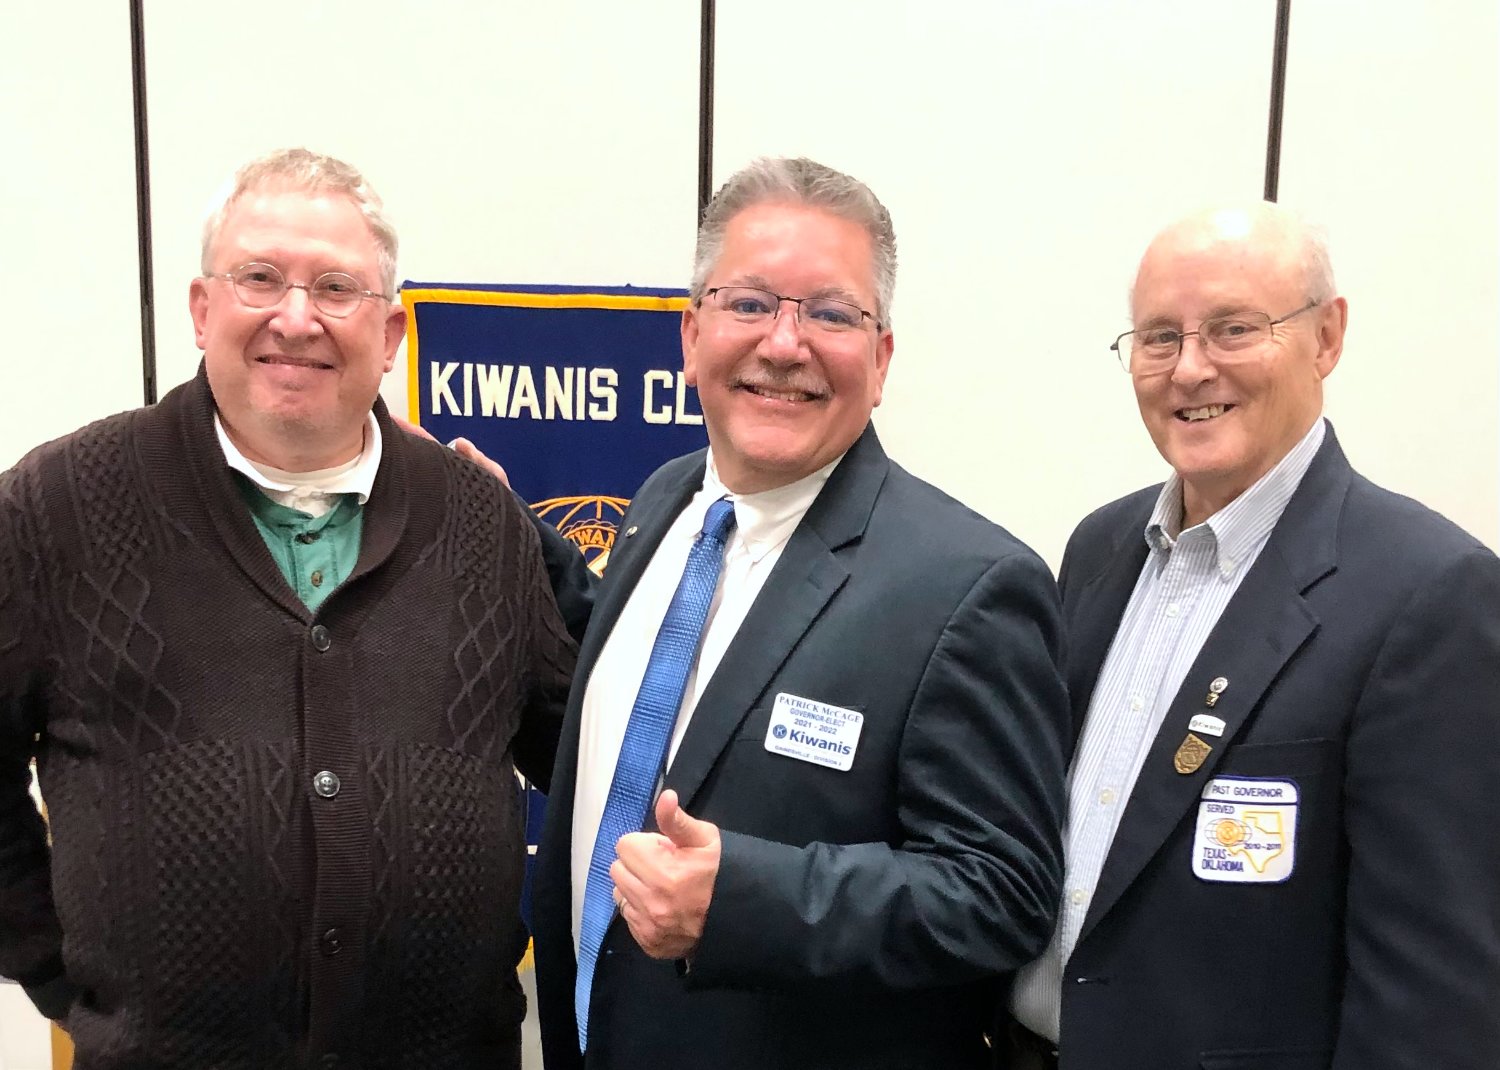 Mineola Kiwanis recently hosted six out of the seven clubs in Division 34 for the Texas-Oklahoma Governor’s visit. Pictured are, from left,  Mineola Kiwanis President John Epps with T-O Governor Patrick McCage of Gainesville and Past Governor Sam Curry of Mineola.  Division 34 Lt. Governor John Wisdom of Quitman led the meeting.